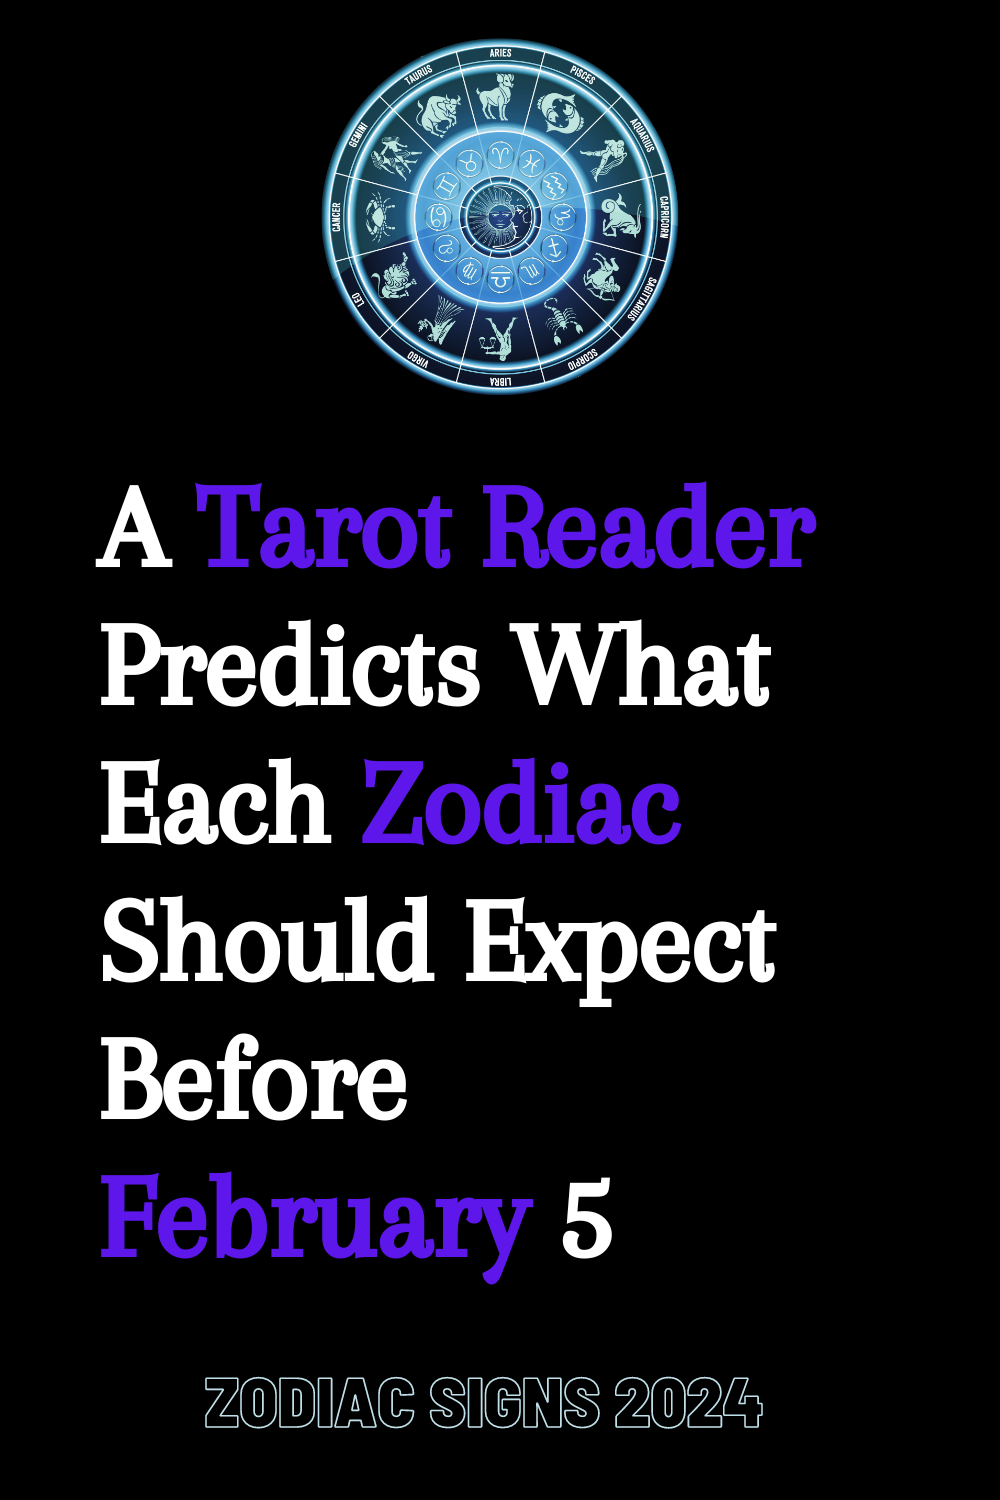 A Tarot Reader Predicts What Each Zodiac Should Expect Before February 5